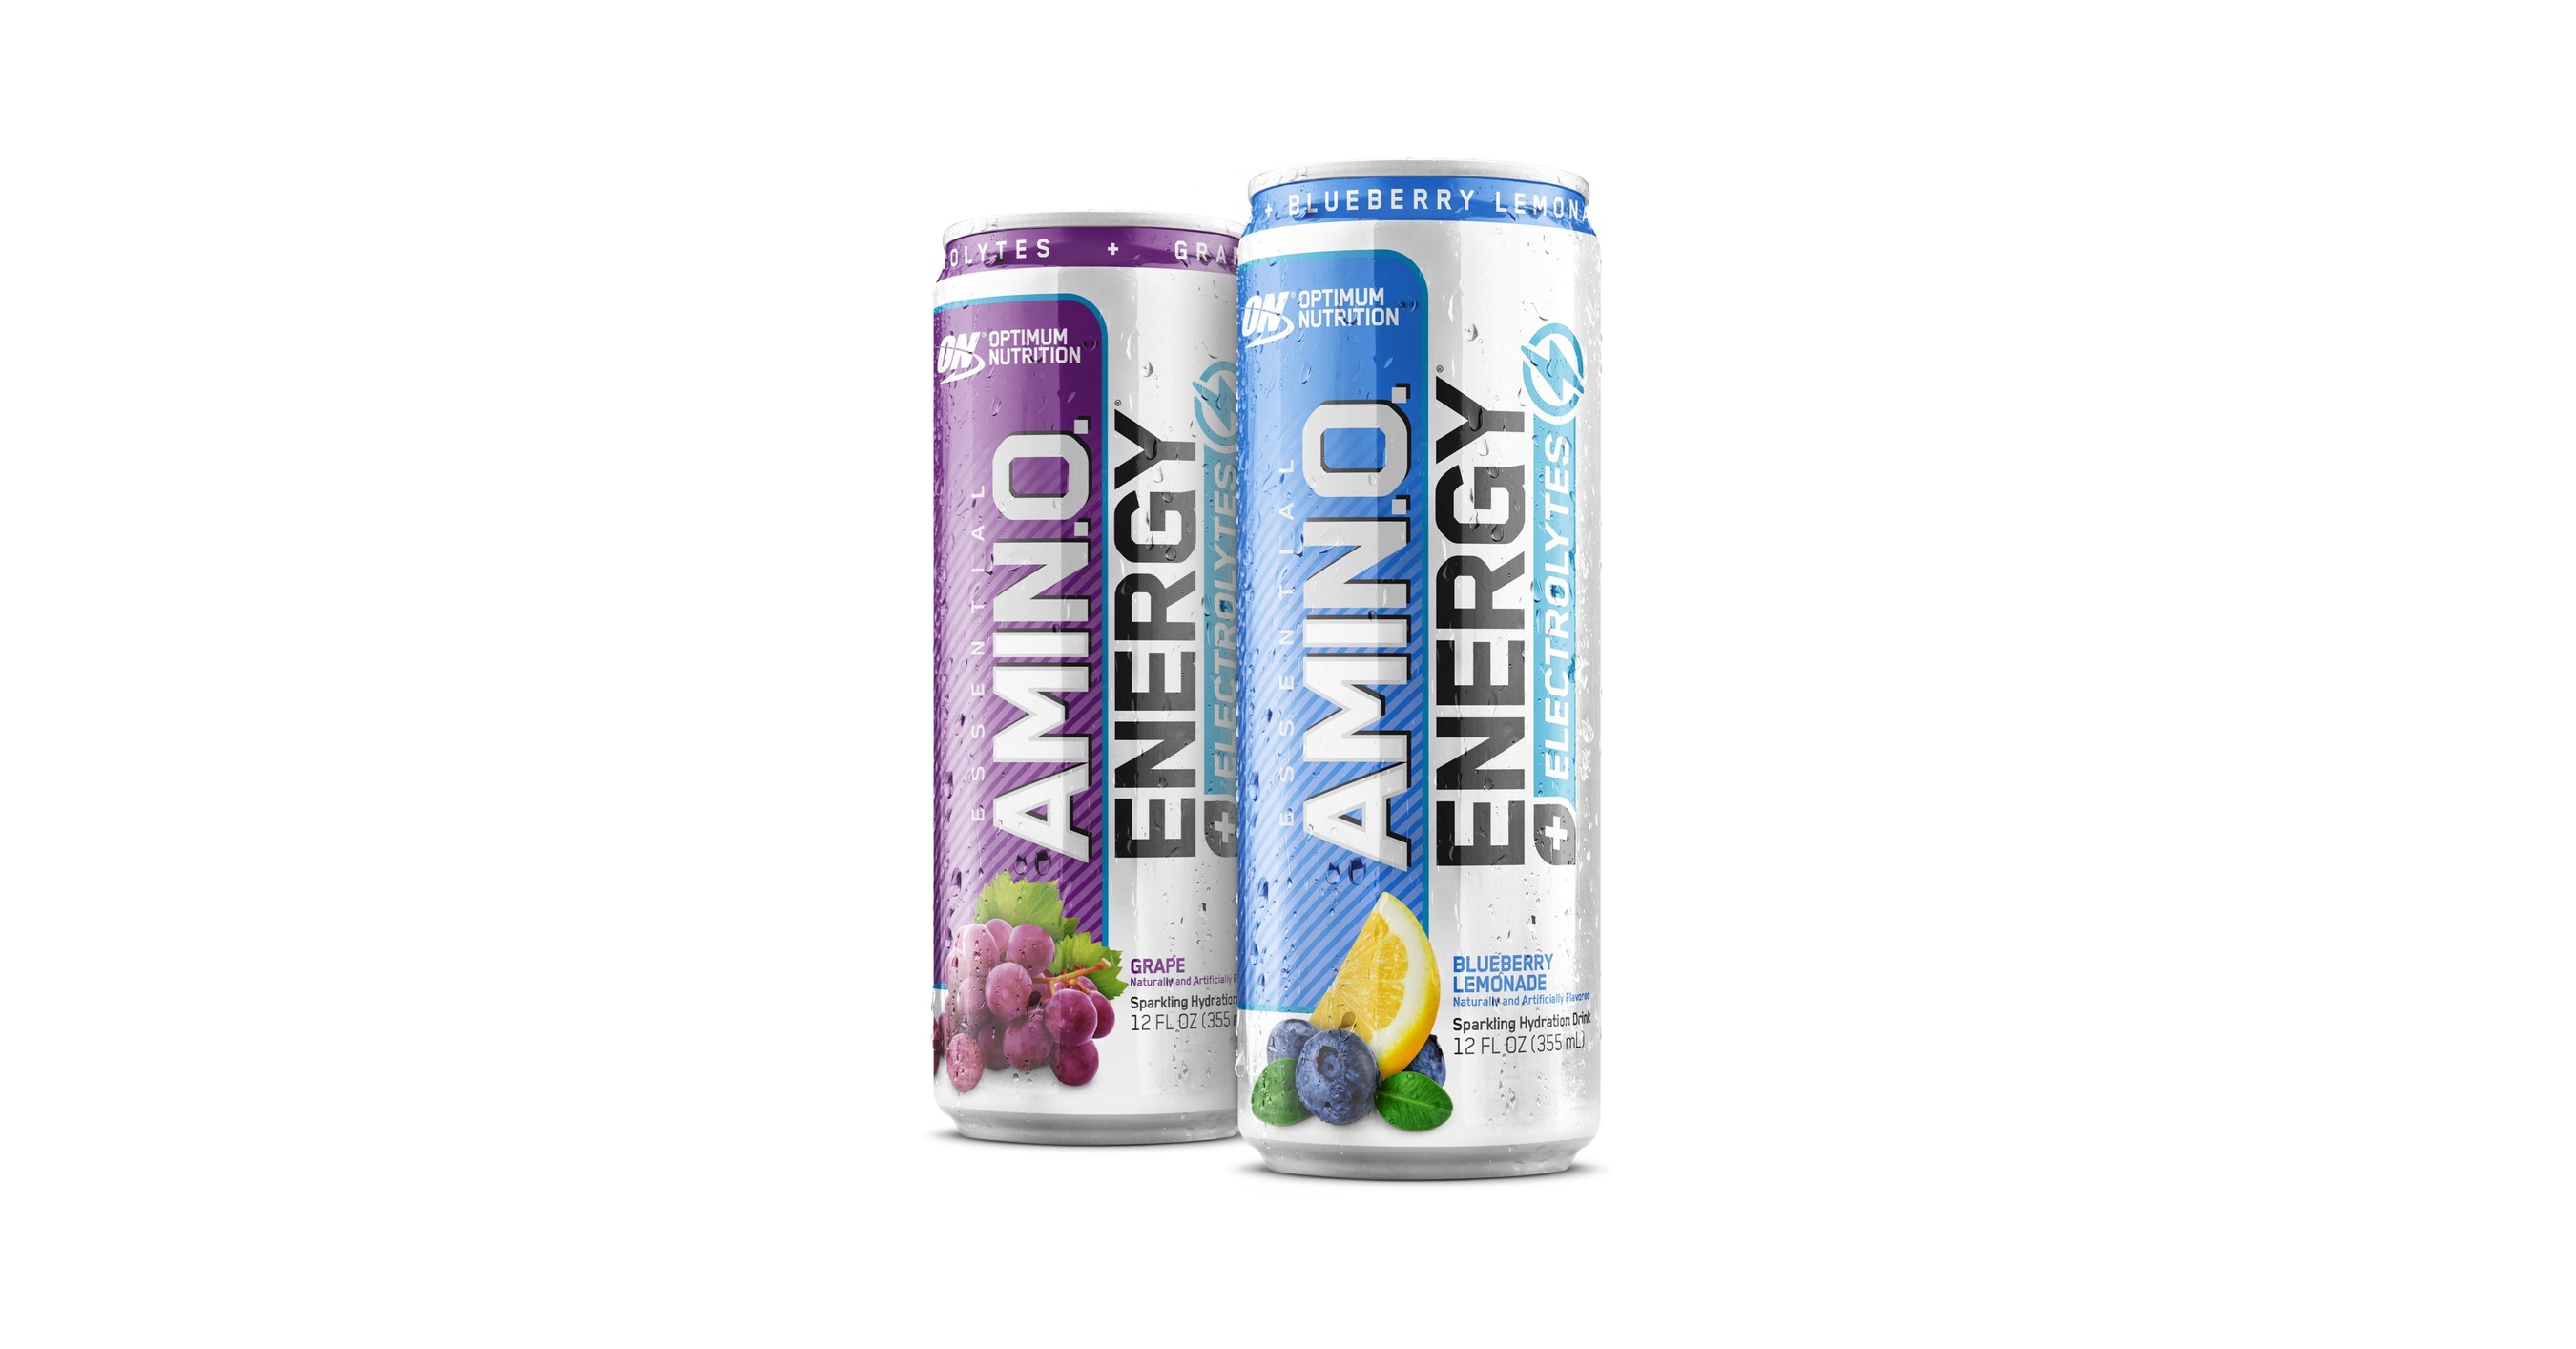 OPTIMUM NUTRITION Earns Distribution of ESSENTIAL AMIN.O. ENERGY PLUS ELECTROLYTES SPARKLING HYDRATION DRINK at Speedway Convenience Stores